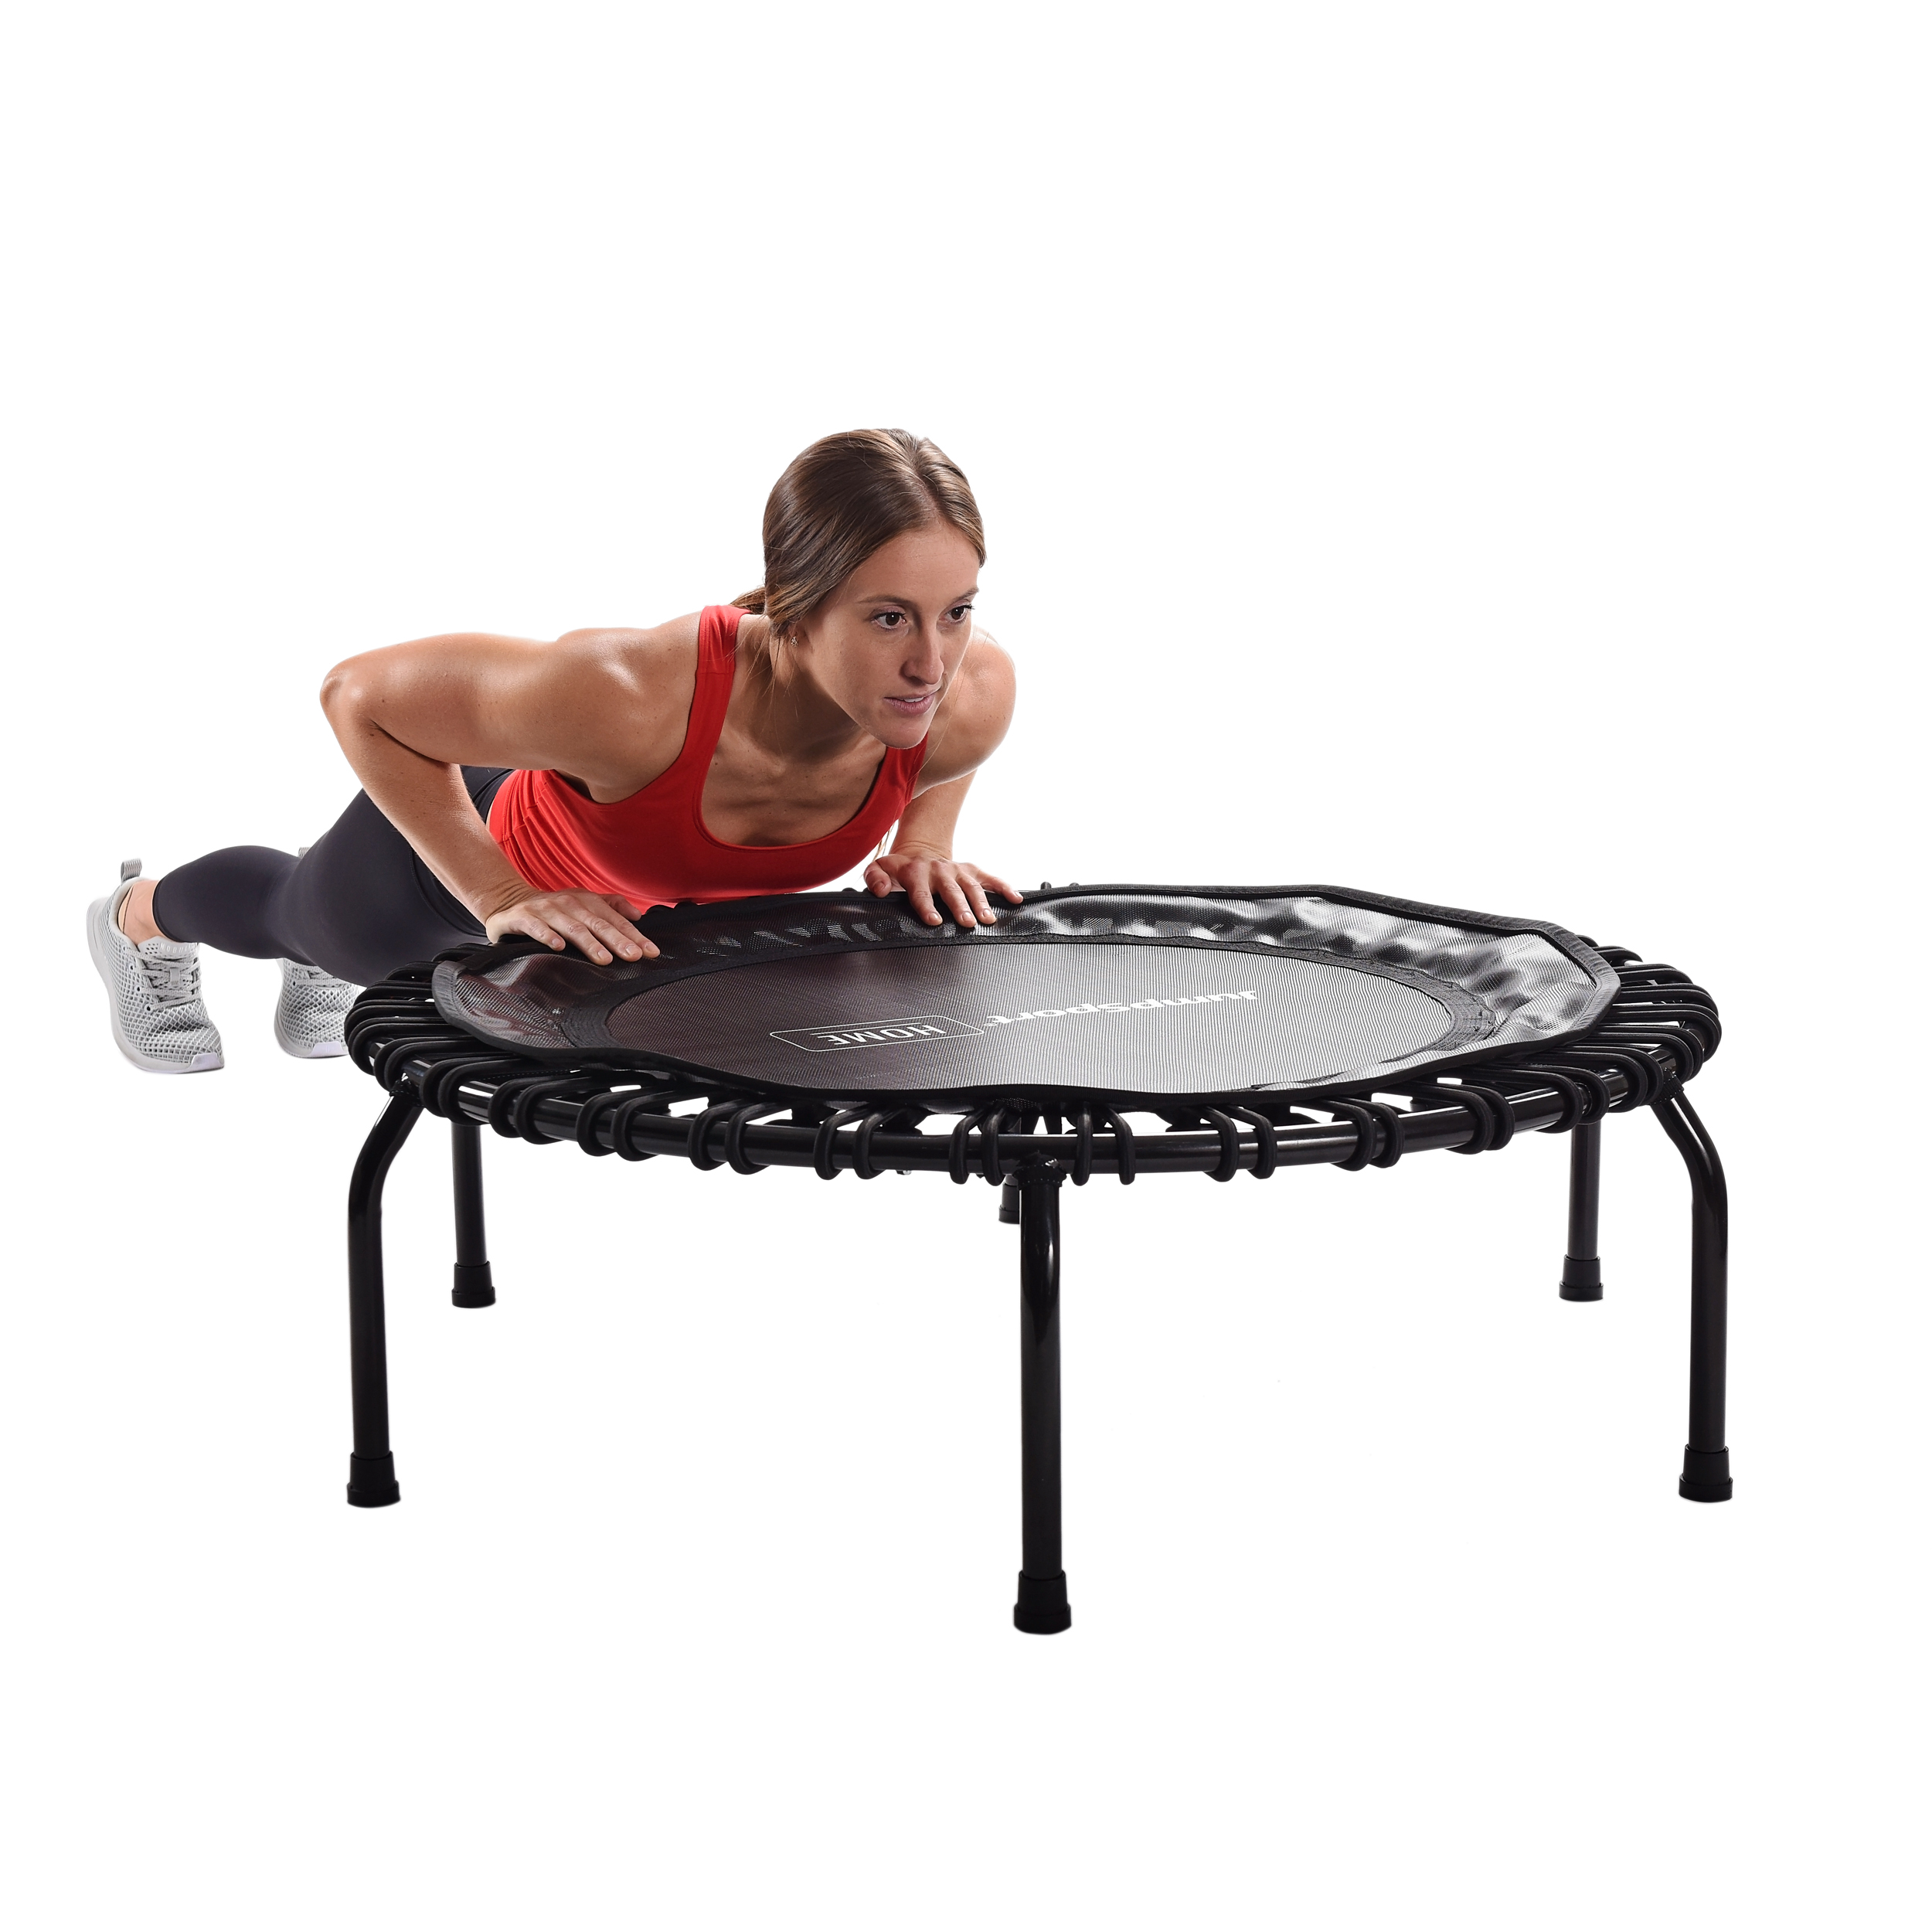 JumpSport 250 Durable 35.5 Cardio Workout Home Fitness Trampoline, Pearl  White, 1 Piece - City Market